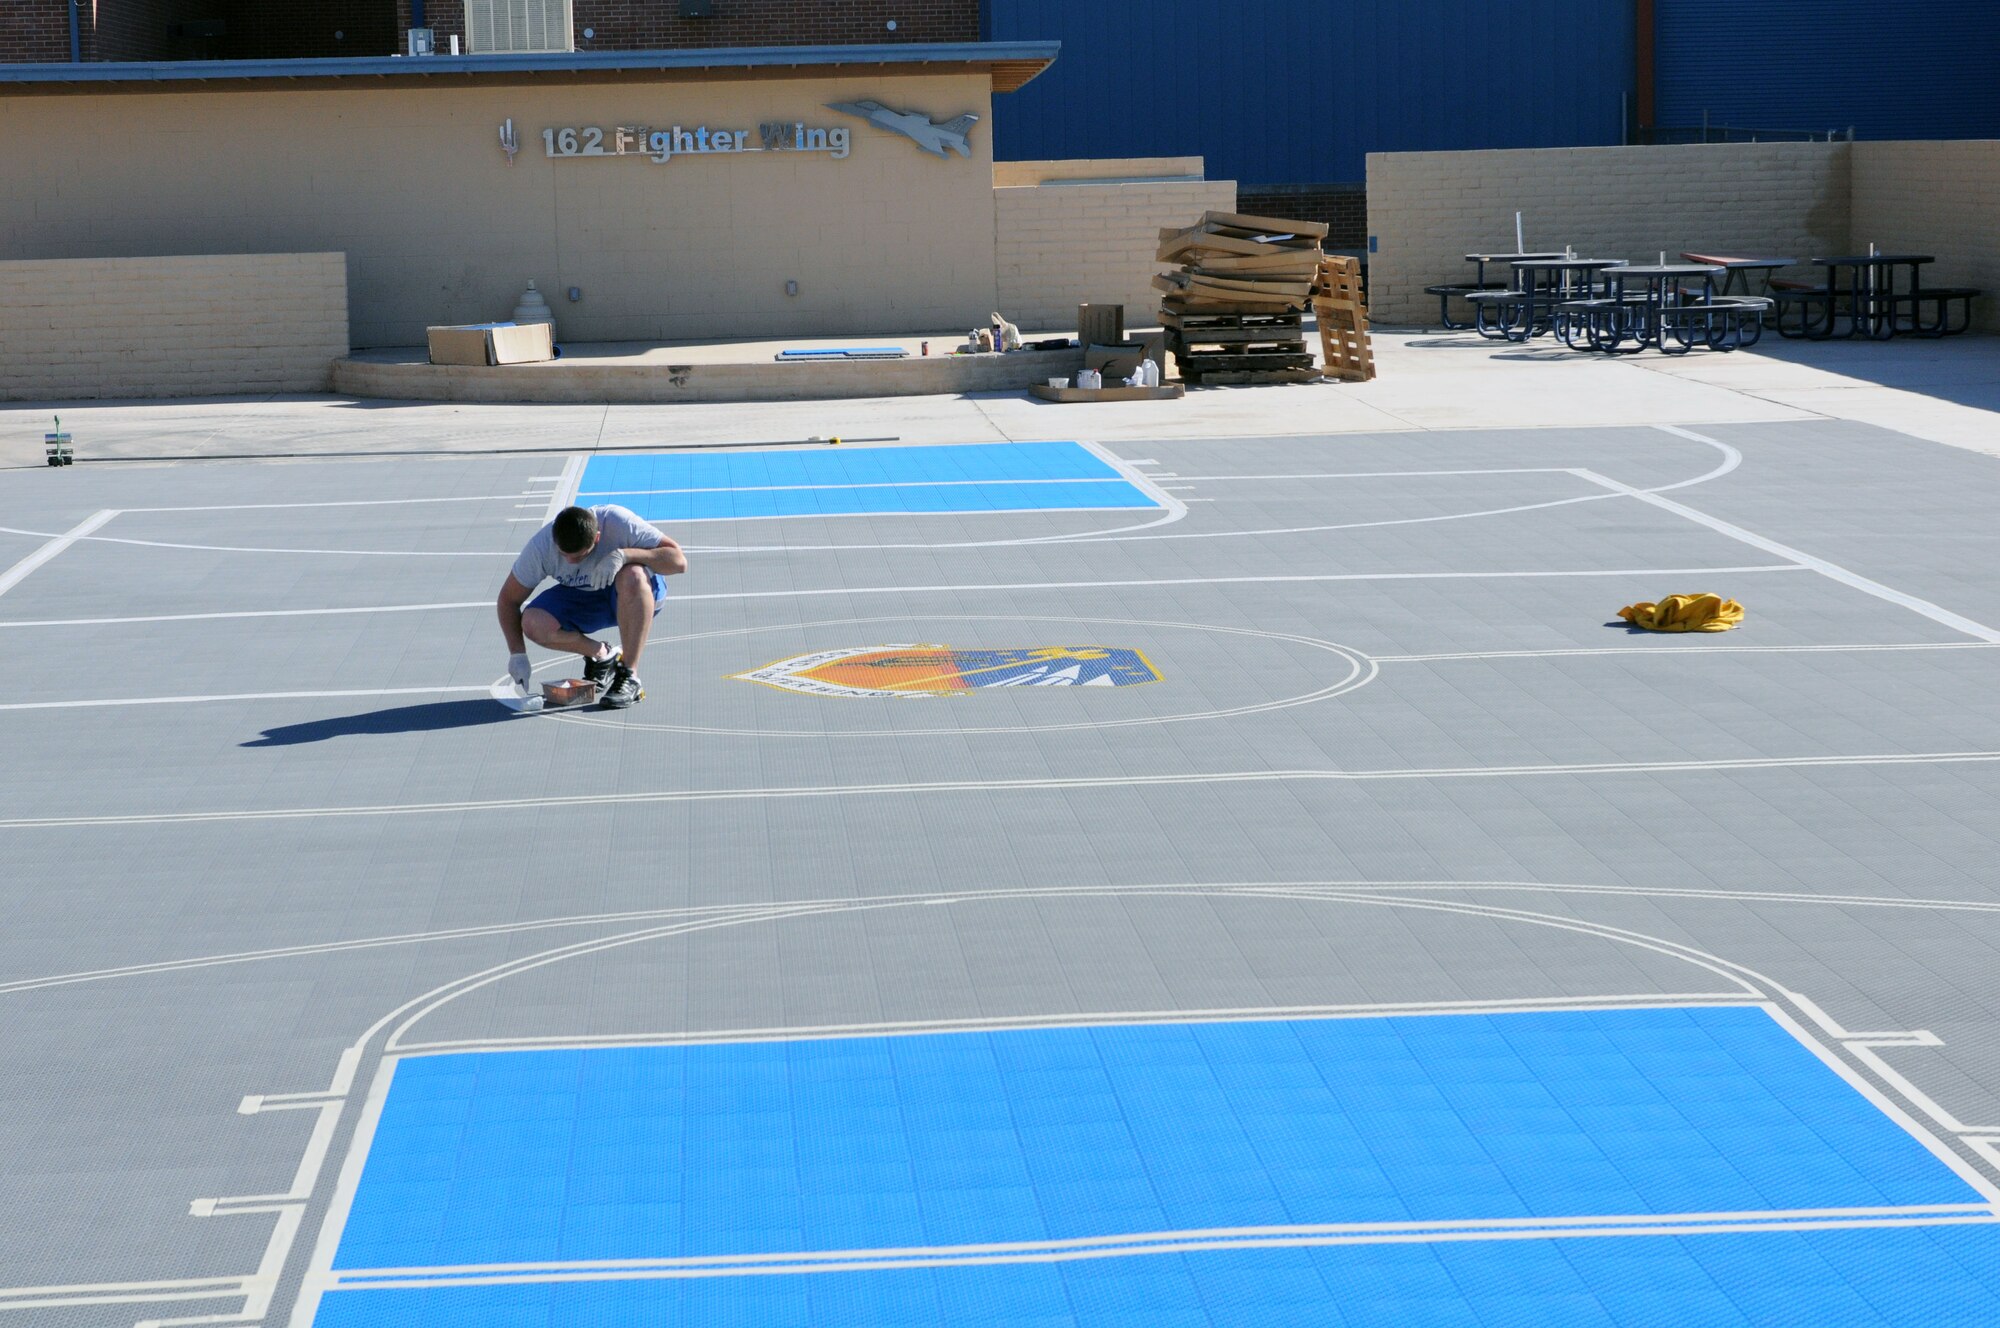 A contractor hired to install the 162nd Fighter Wing’s new basketball court at Tucson International Airport paints lines around the wing patch at center court Dec. 10. The new court behind building 15 will provide more useable space on base for sporting and social events. (Air Force photo/Maj. Gabe Johnson)